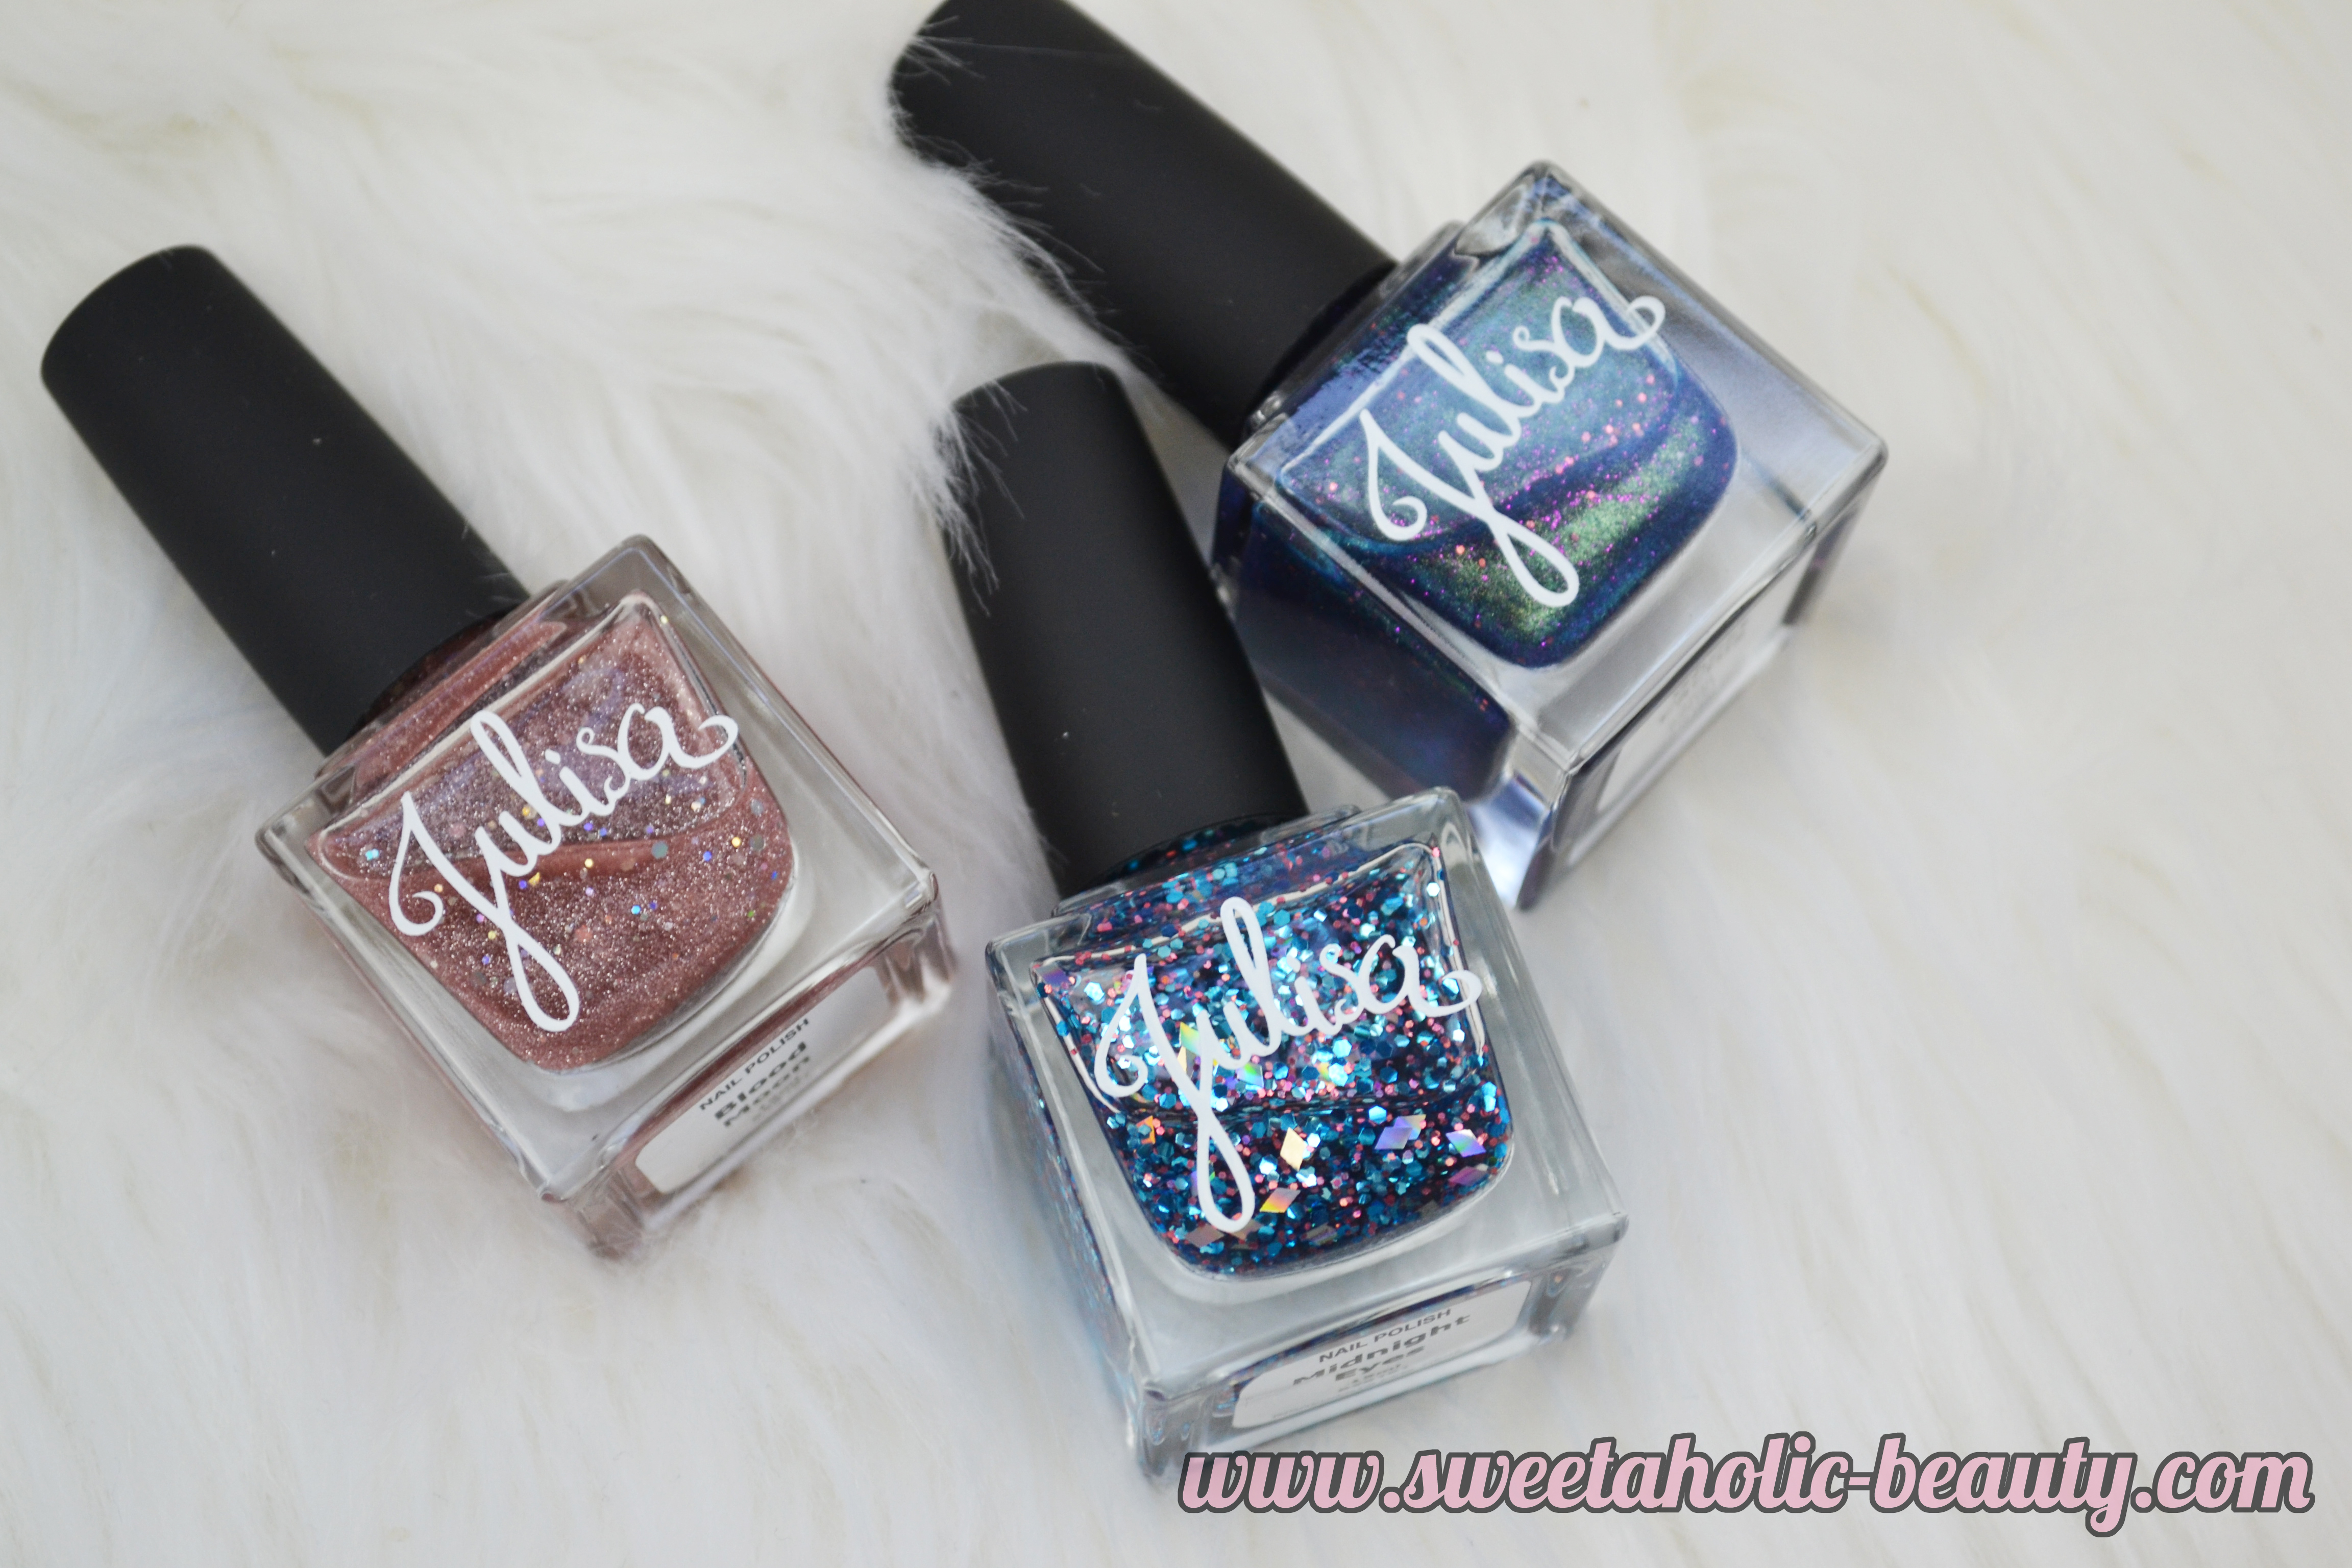 Mermaid Nails with Julisa Nails - Review & Swatches